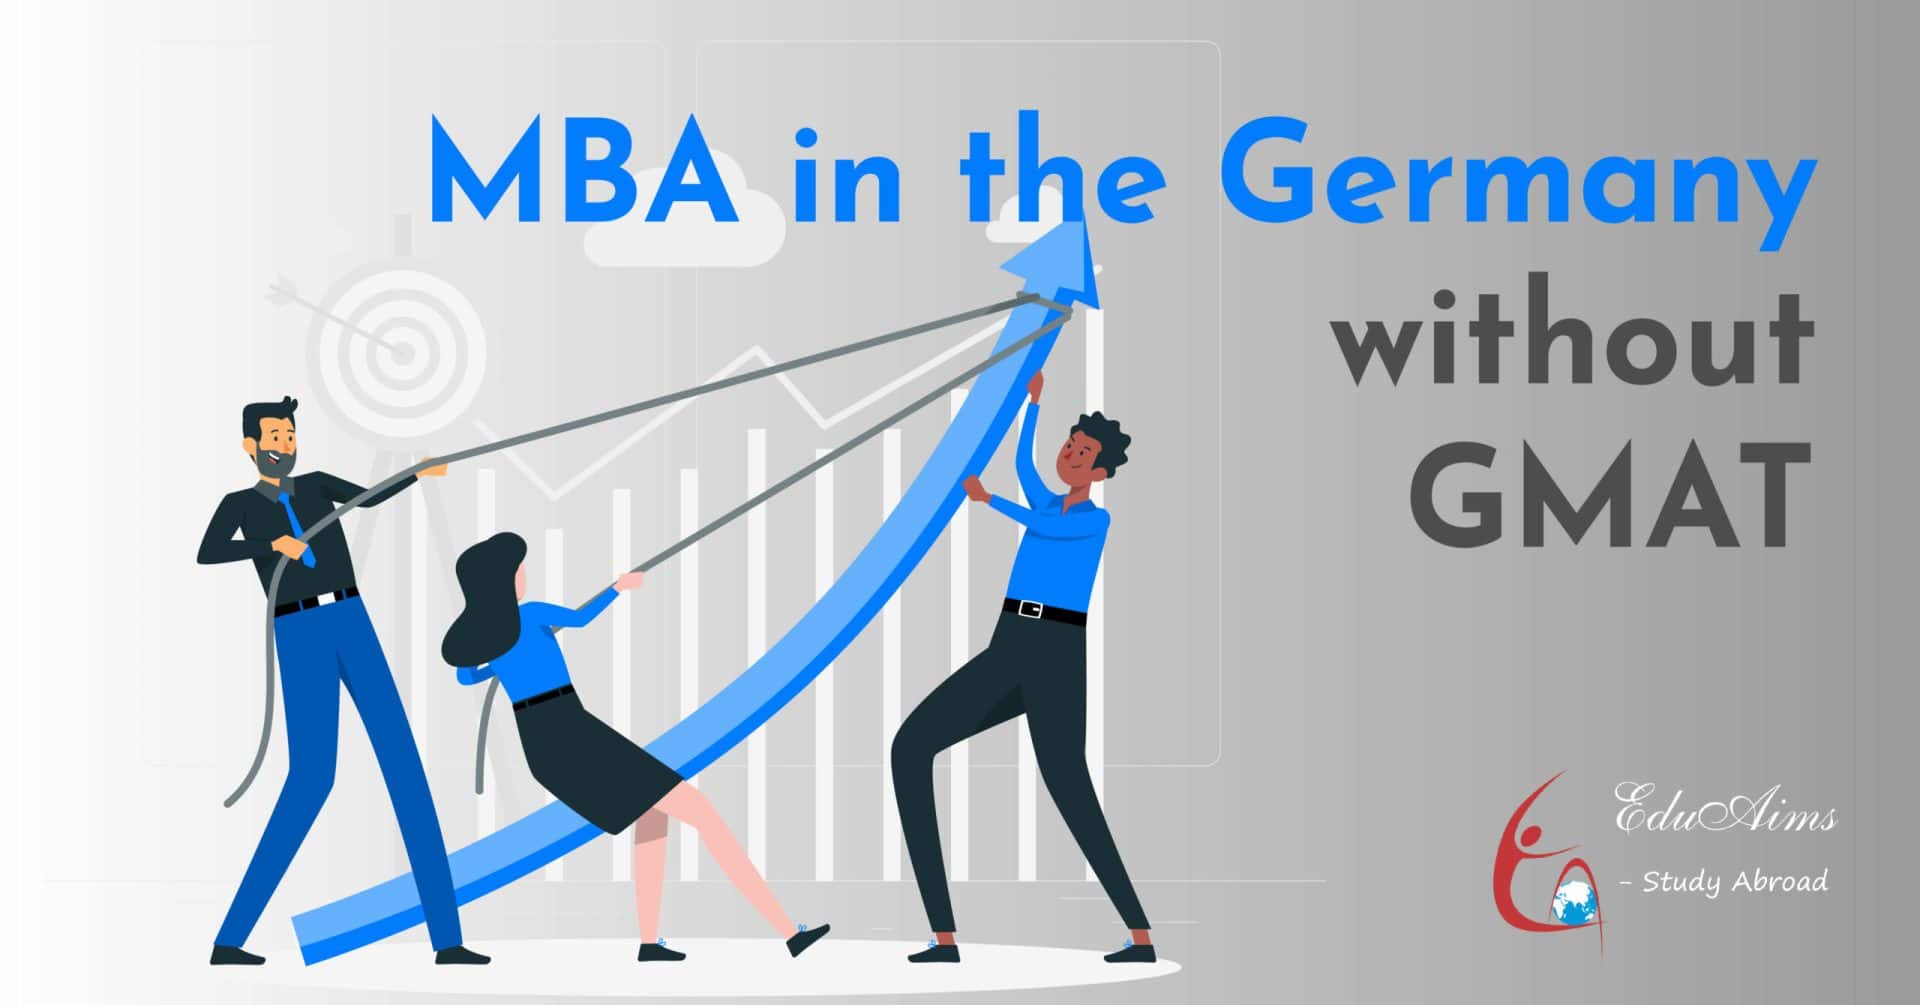 MBA in the Germany without GMAT